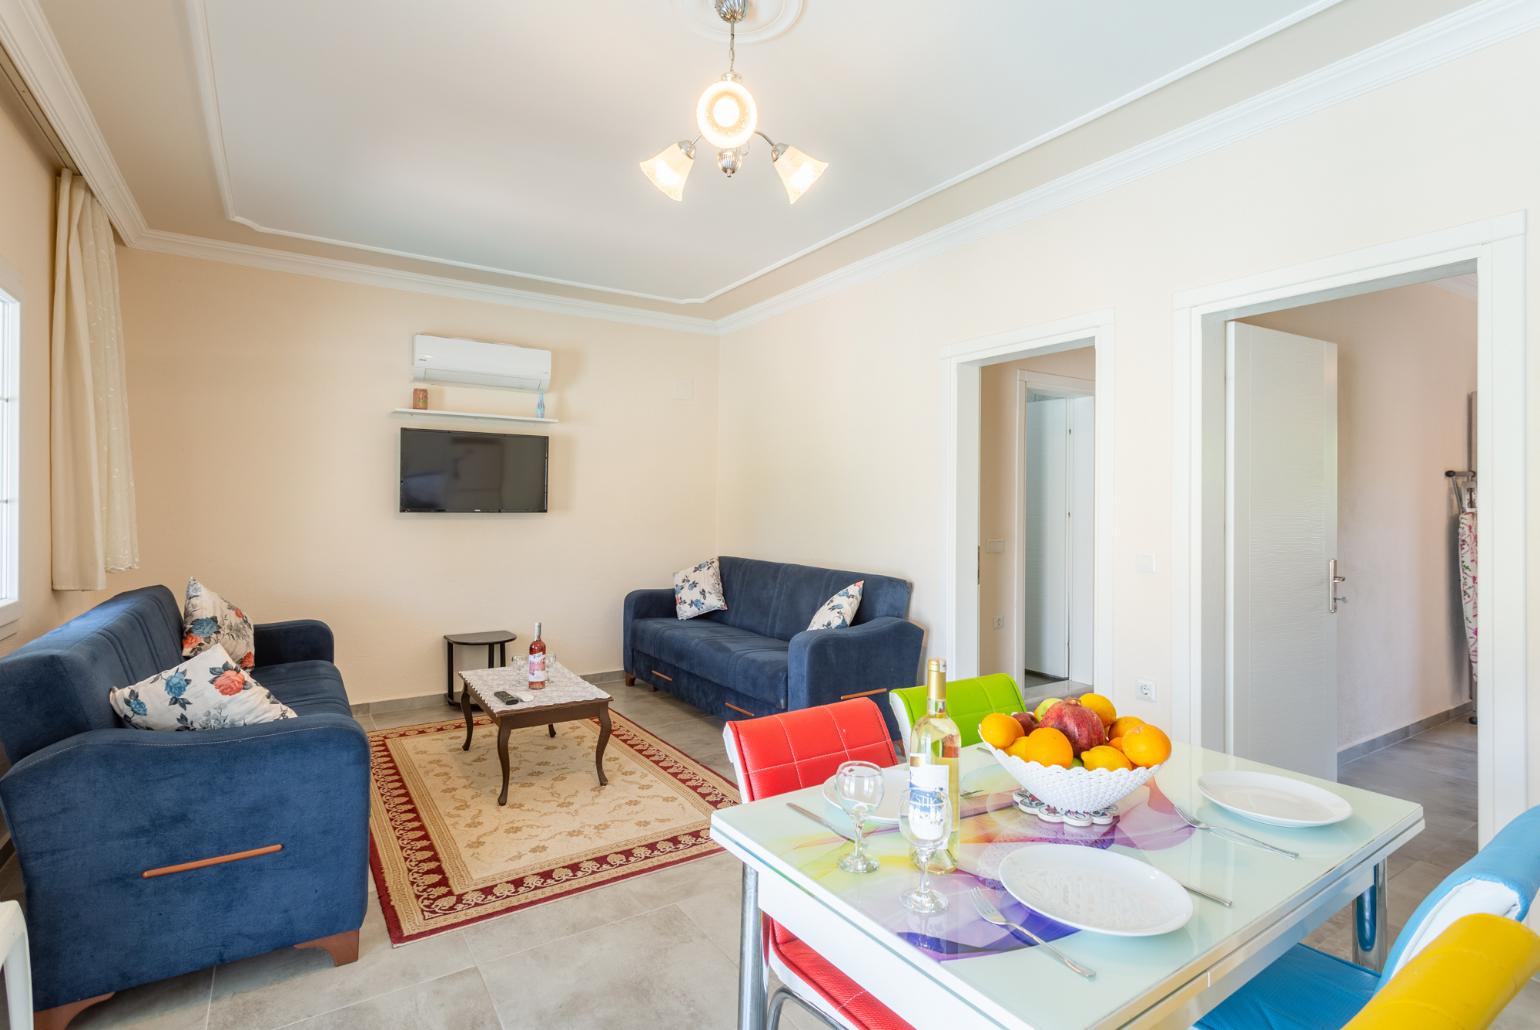 Open-plan living room with sofas, dining area, kitchen, A/C, WiFi internet, satellite TV, and terrace access